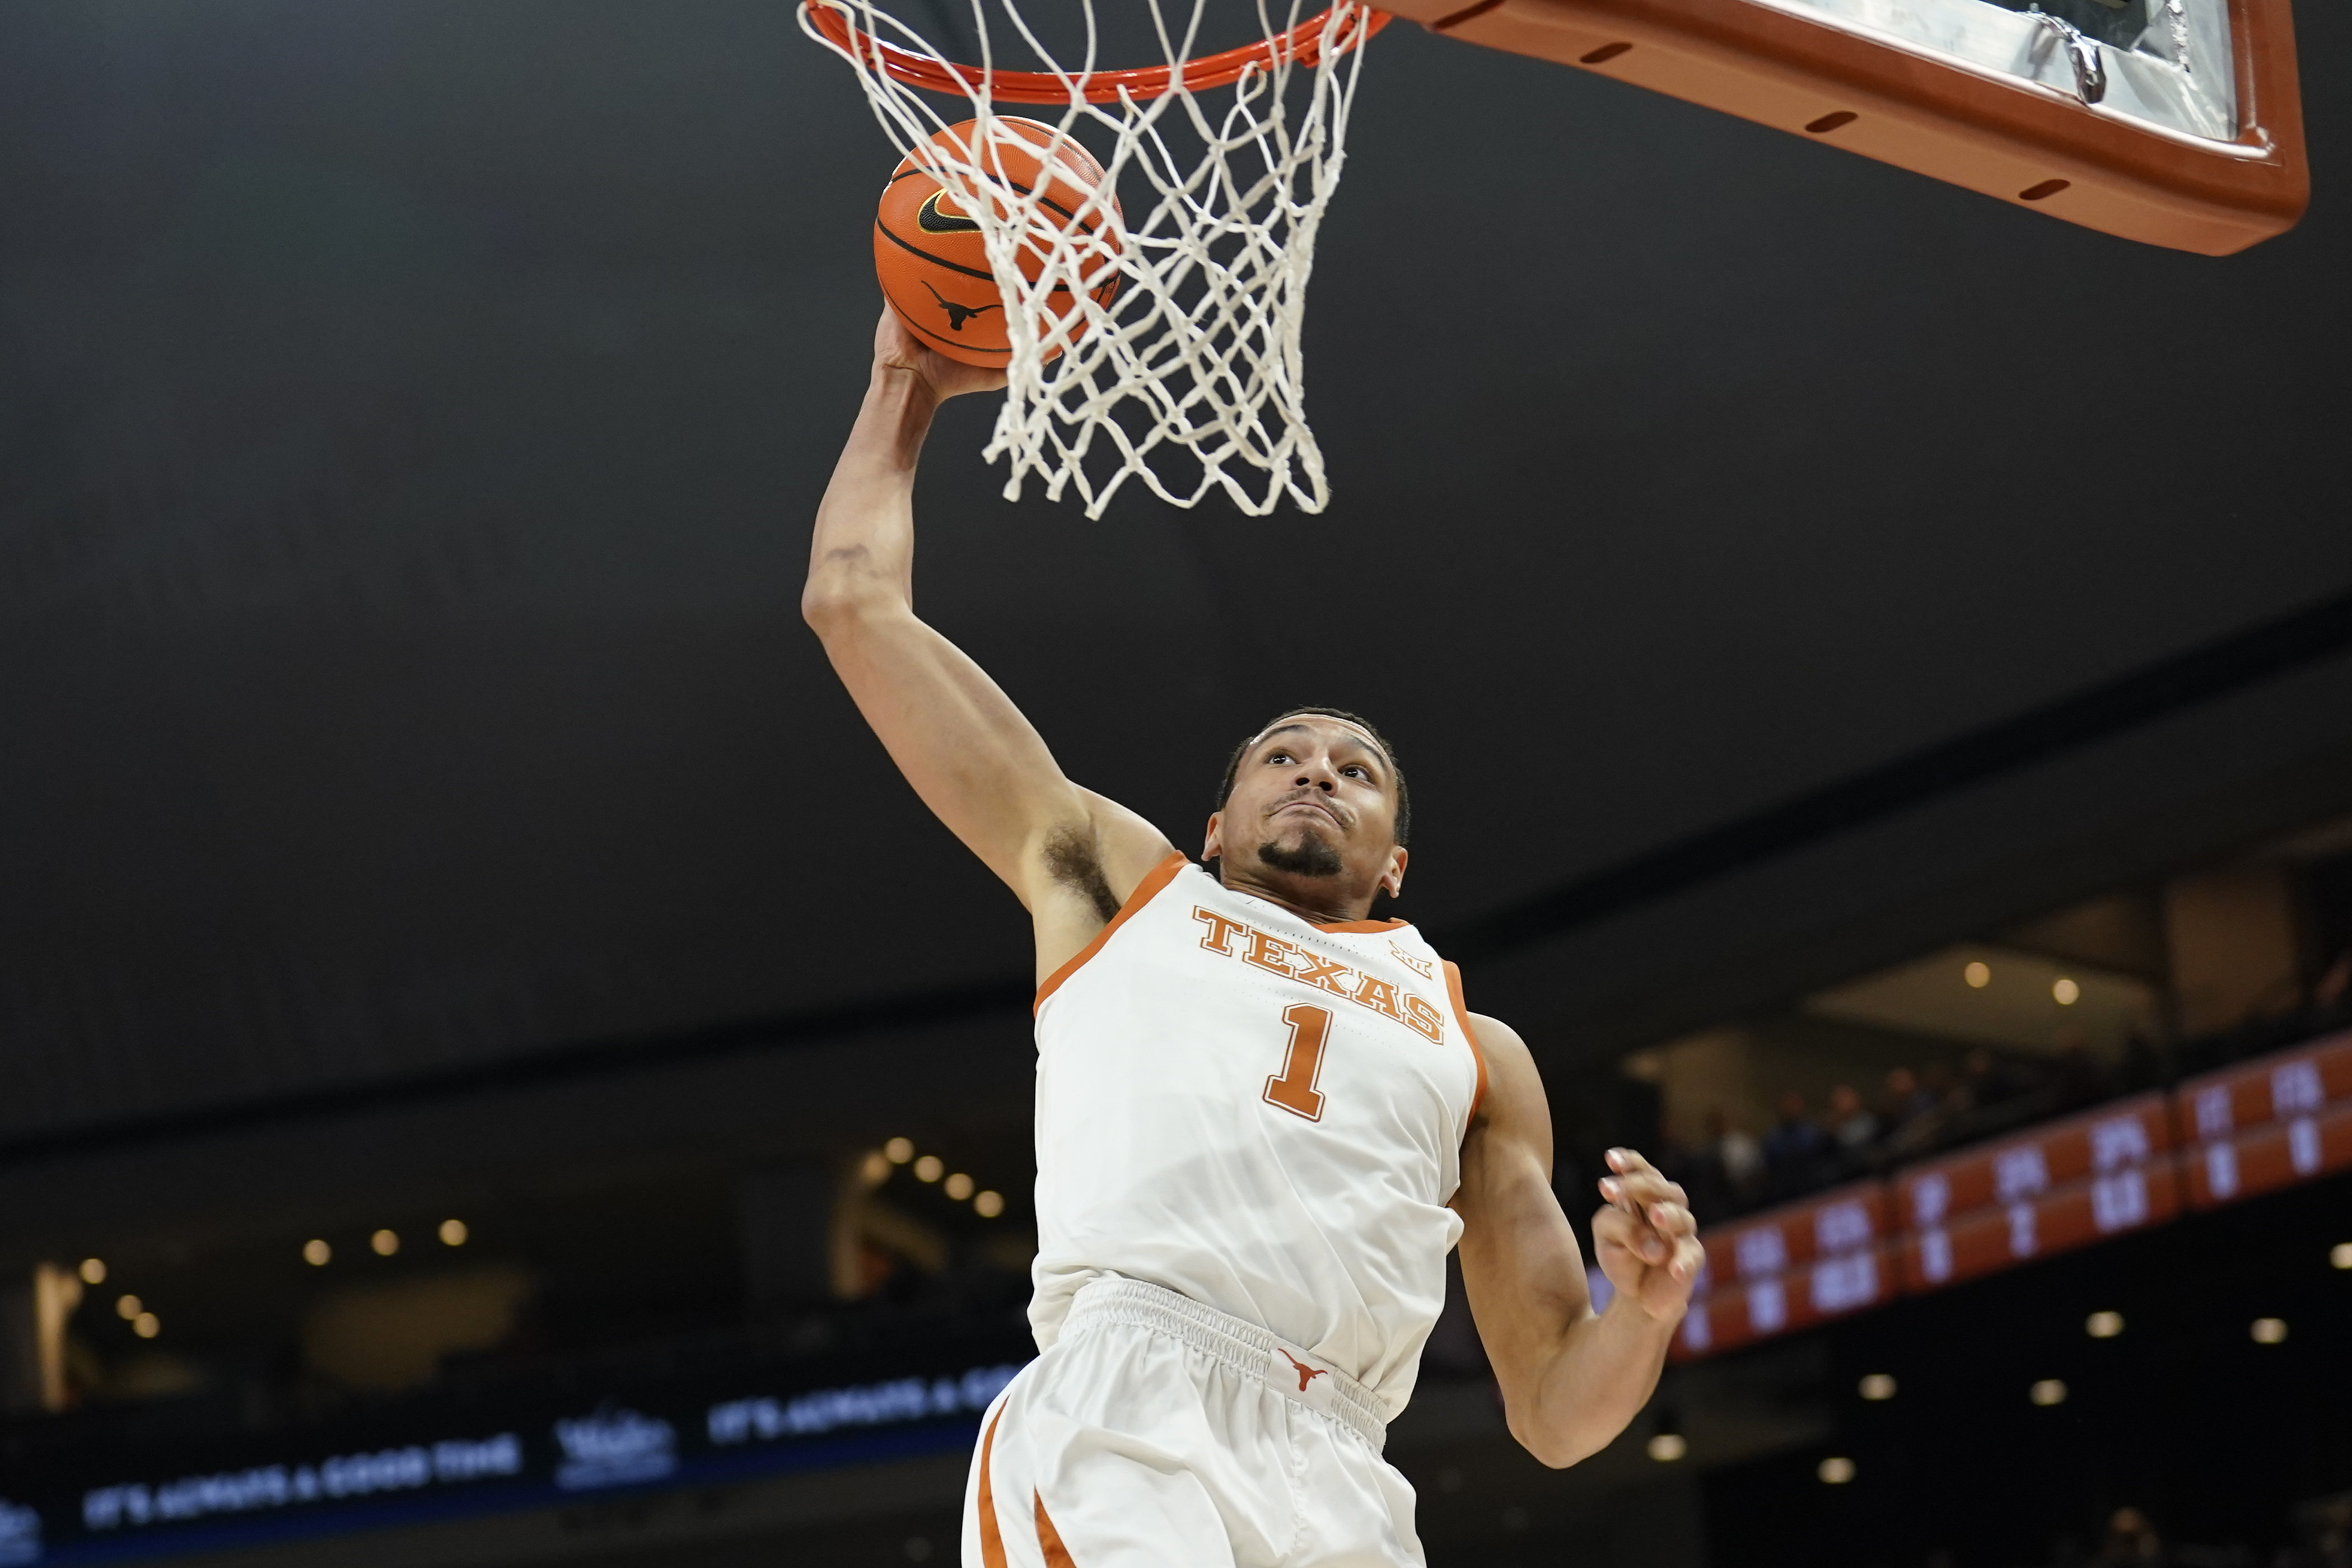 How to Watch, Preview: No. 7 Texas Longhorns vs. Rice Owls